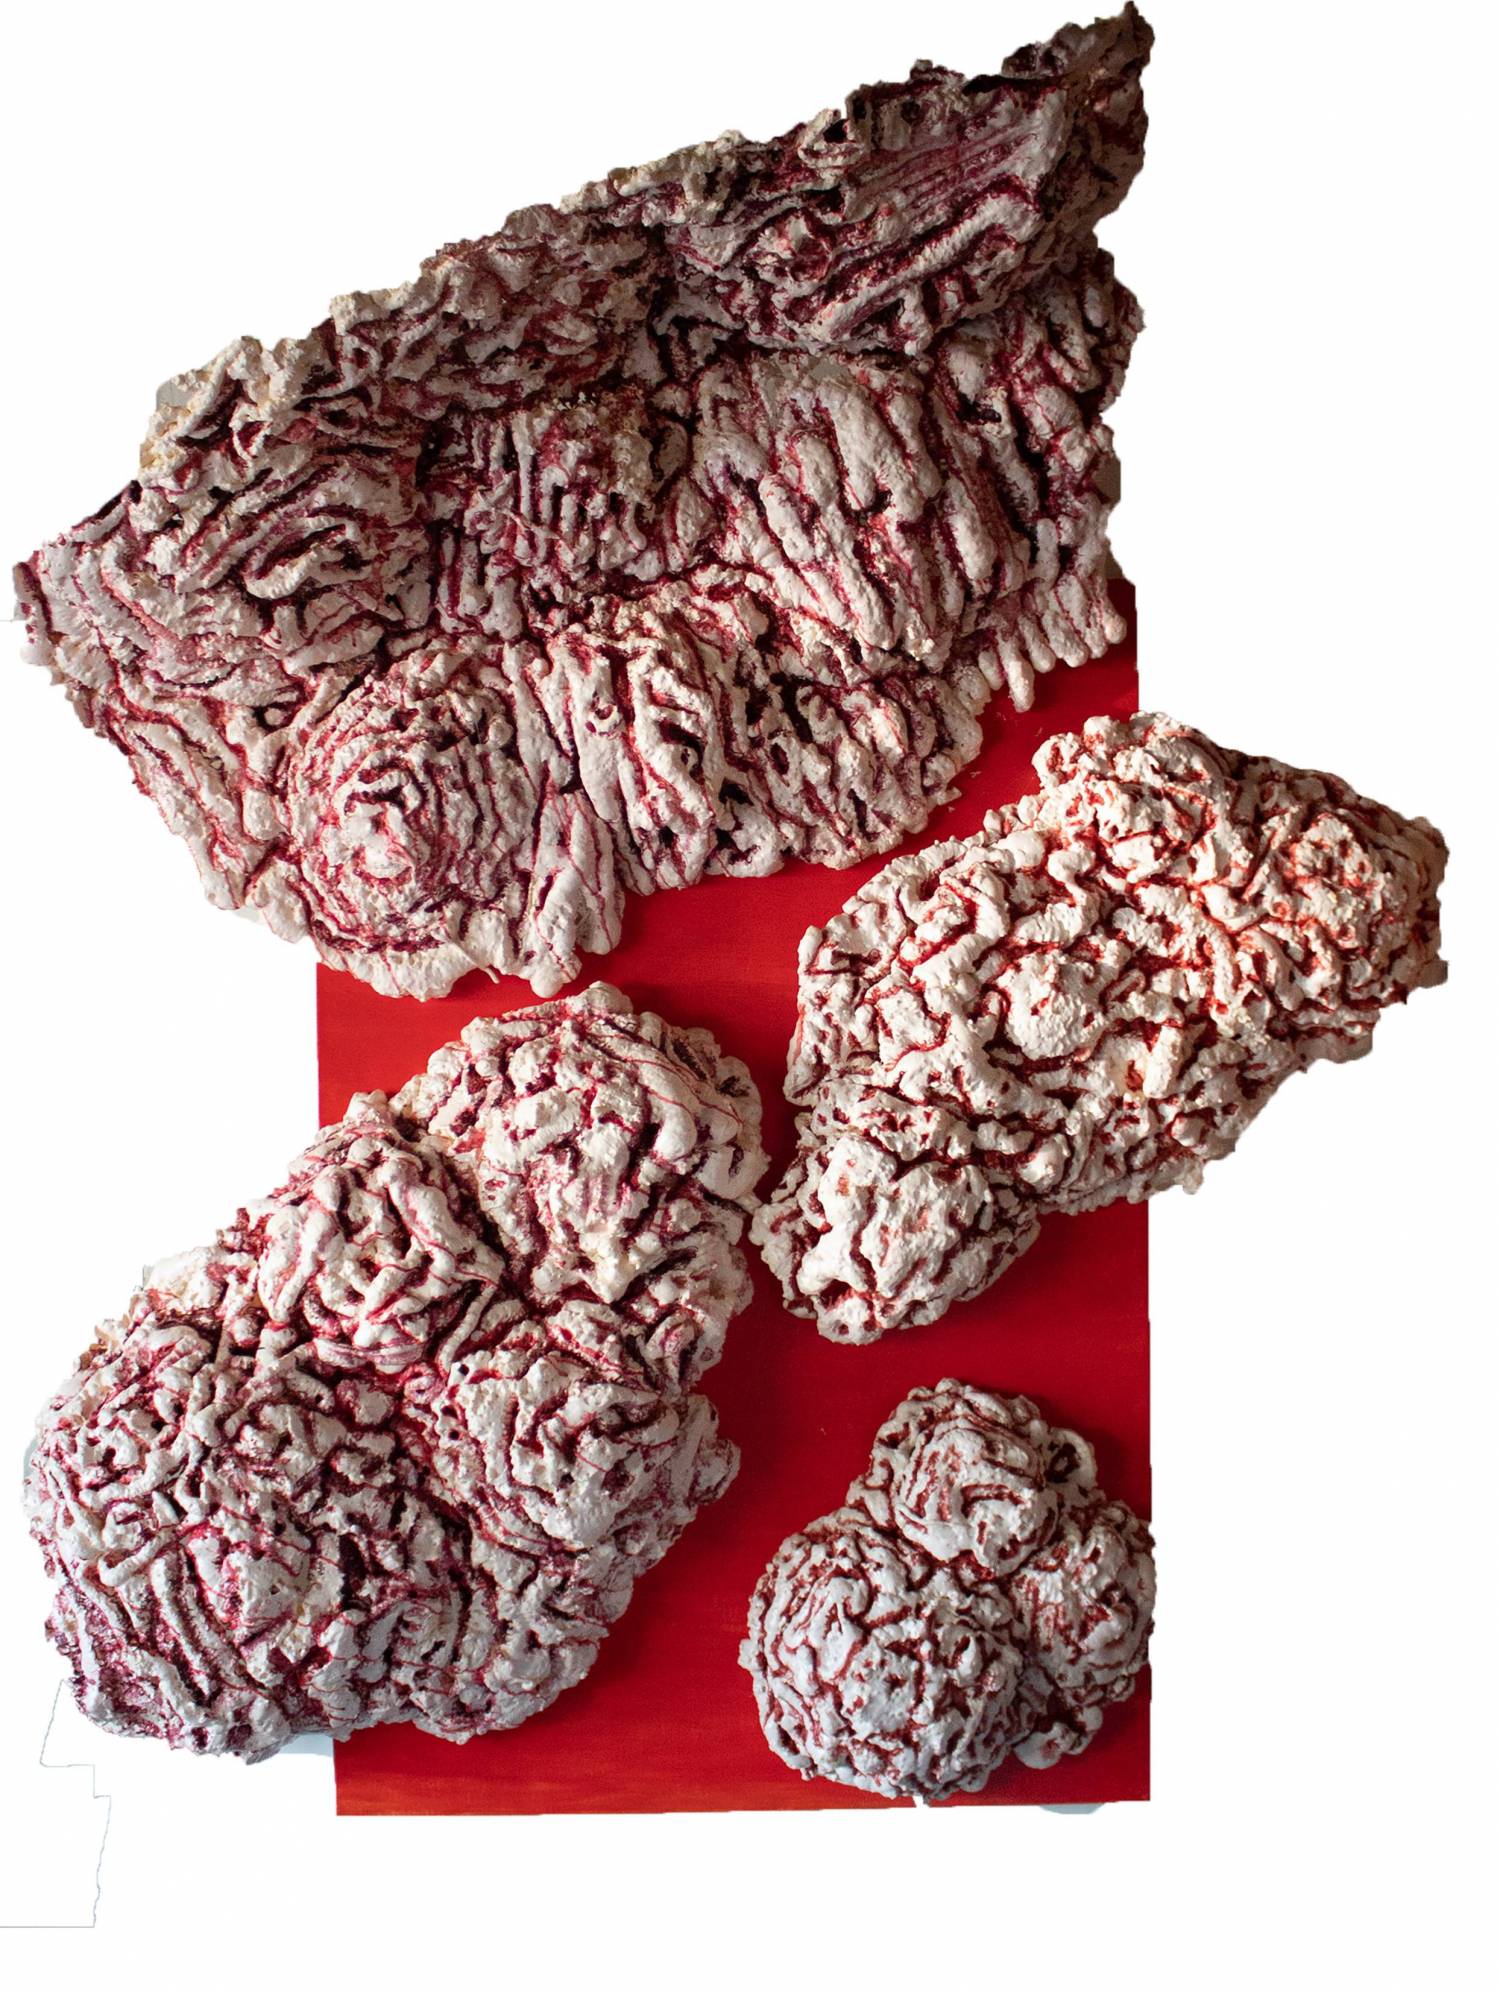 Four expanding foam objects composed on red background.